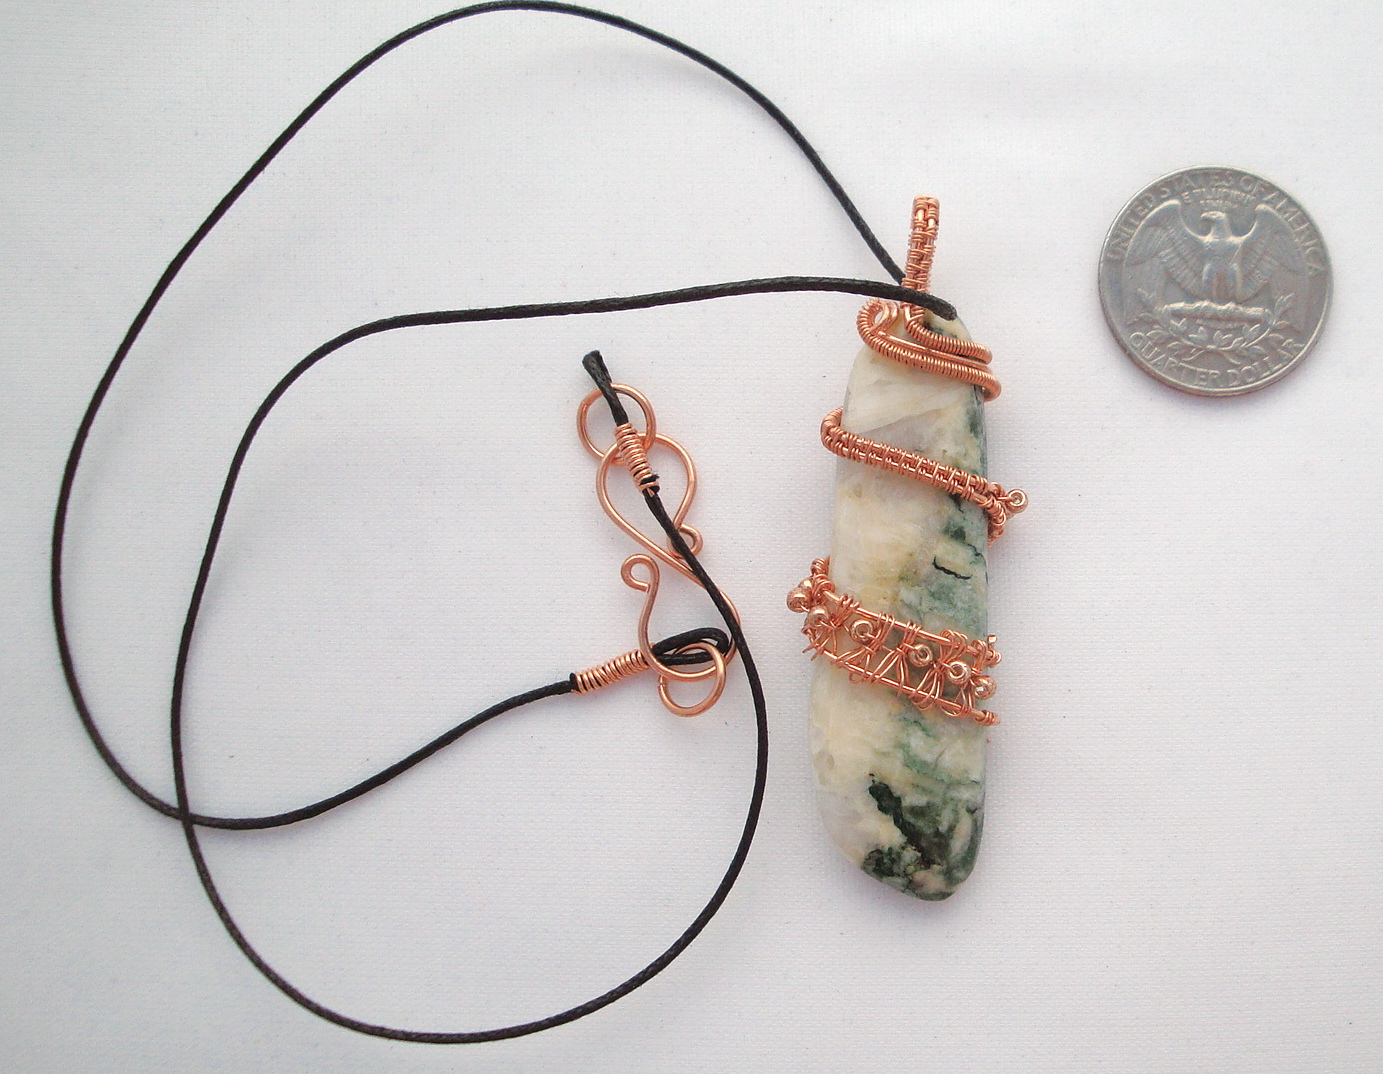 White and green stone wrapped with copper wire